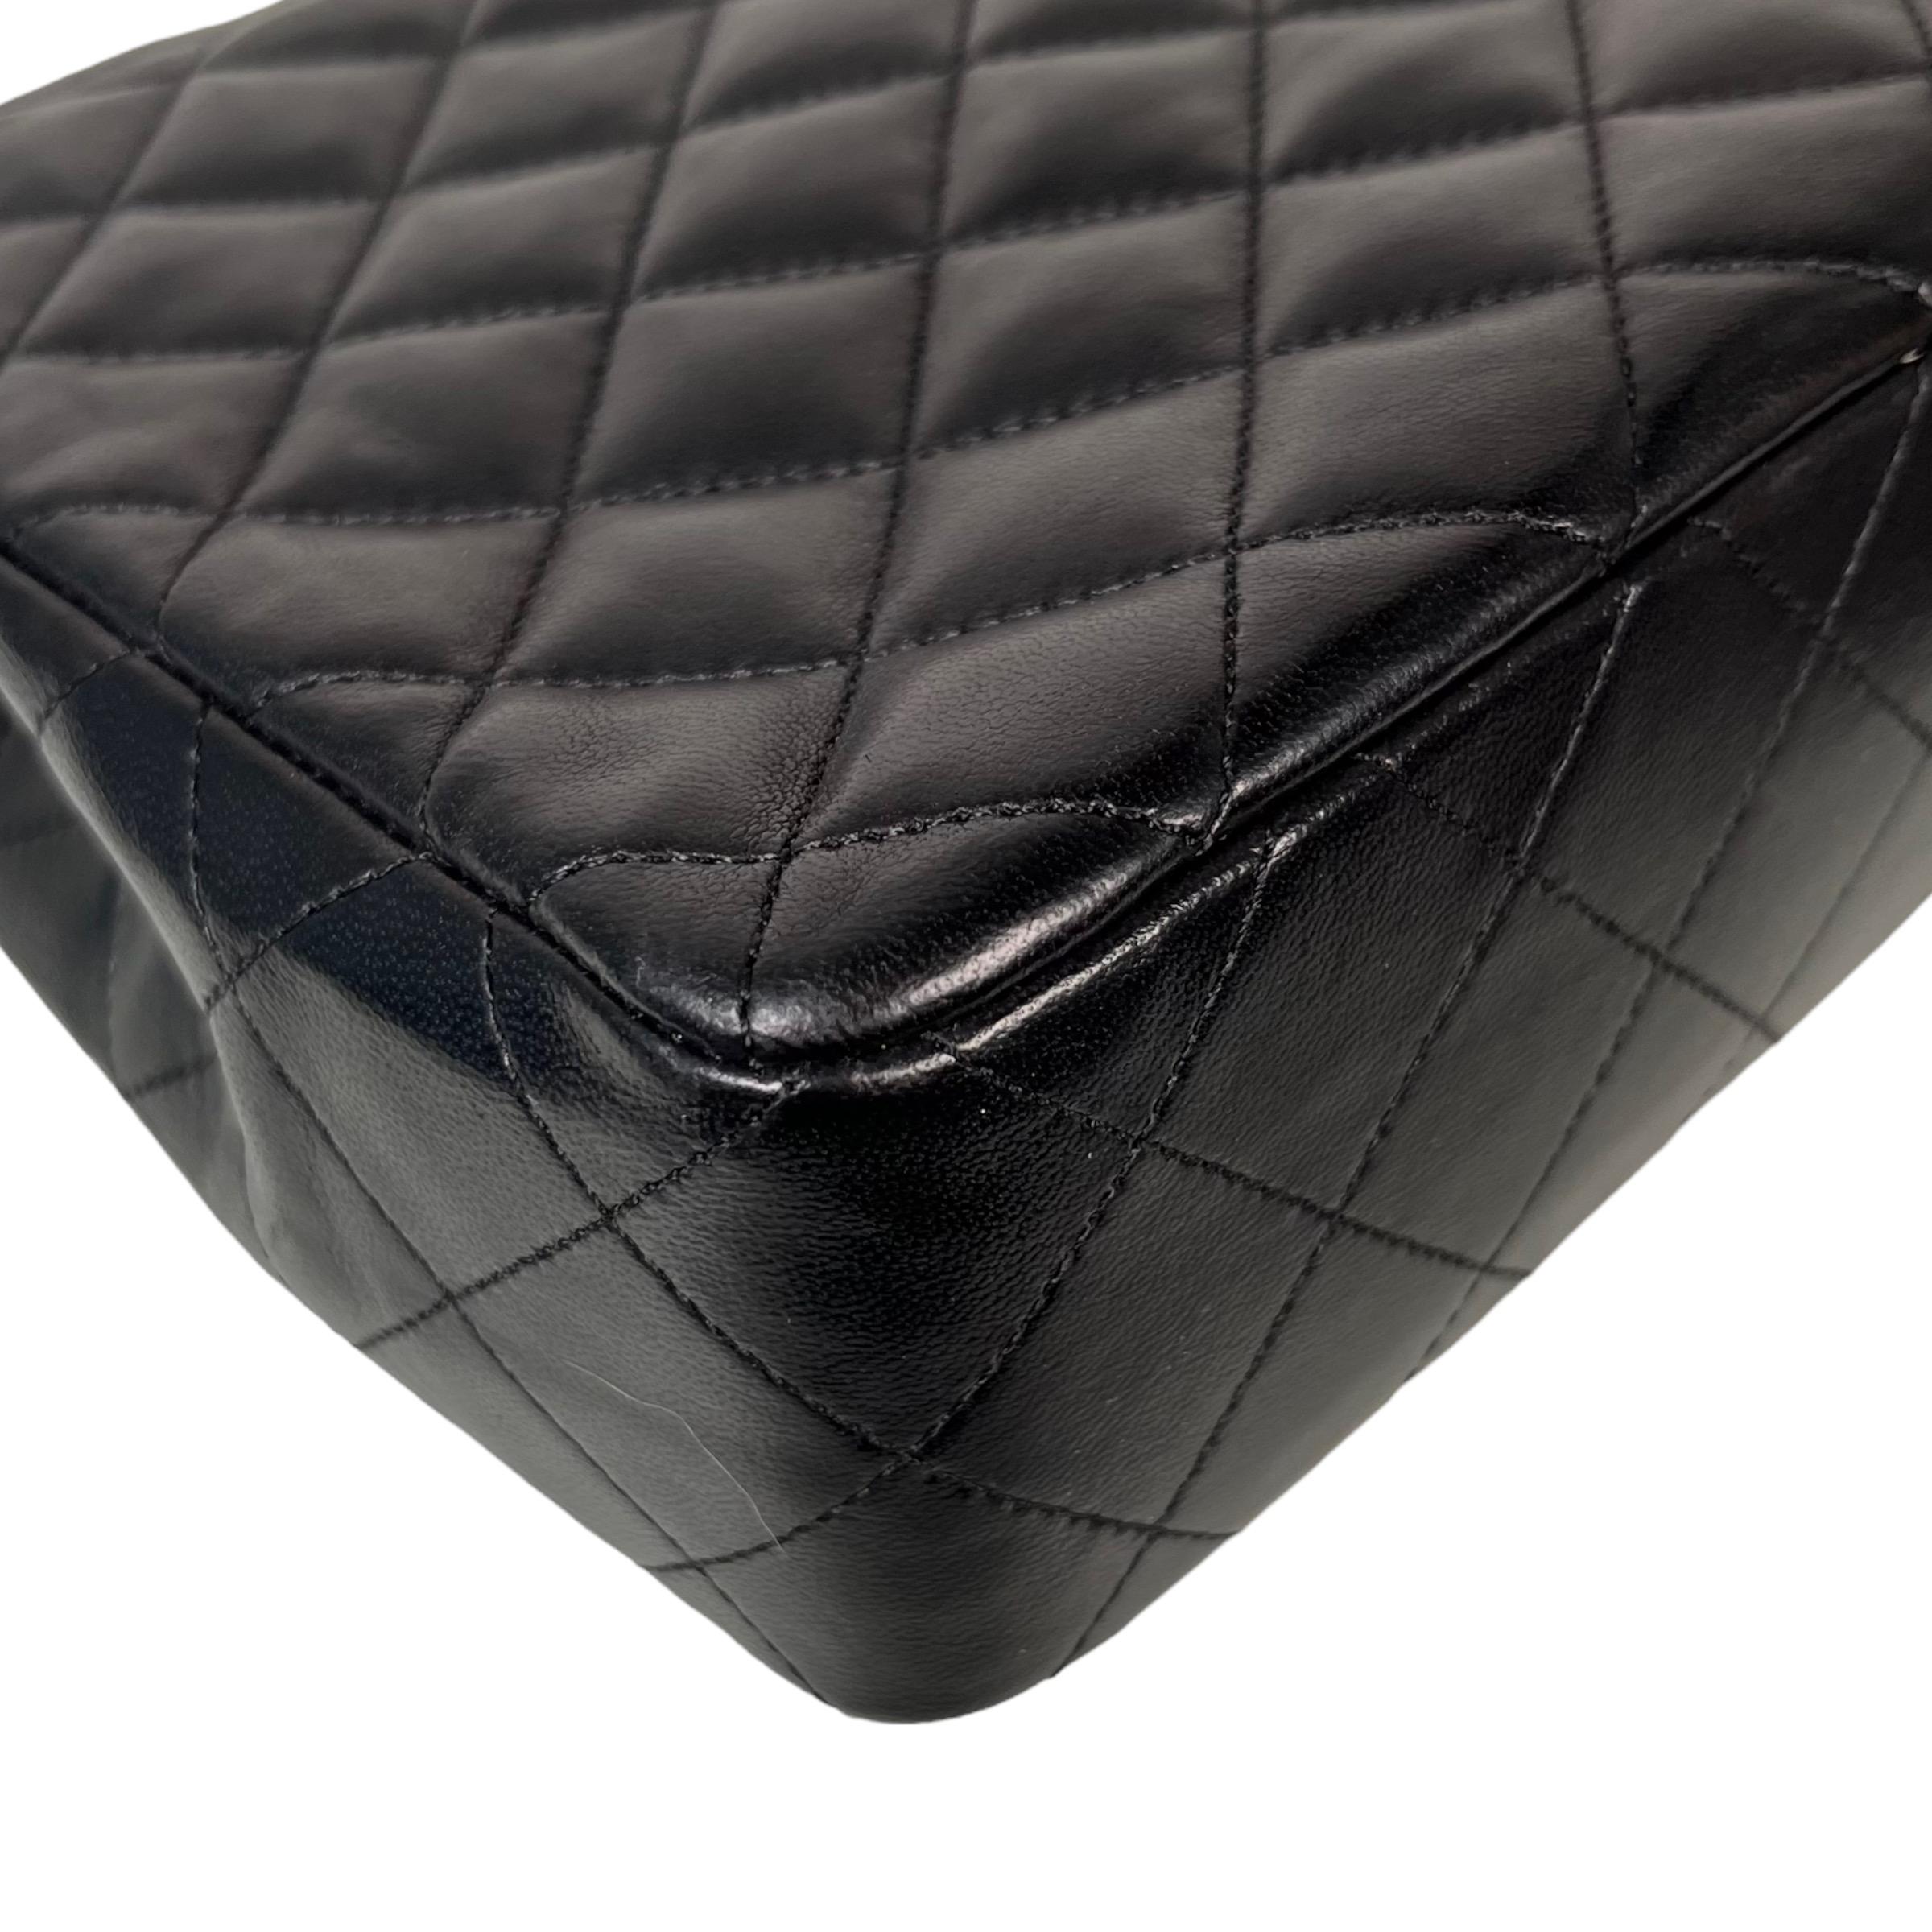 CHANEL Lambskin Quilted Envelope Flap Bag 2